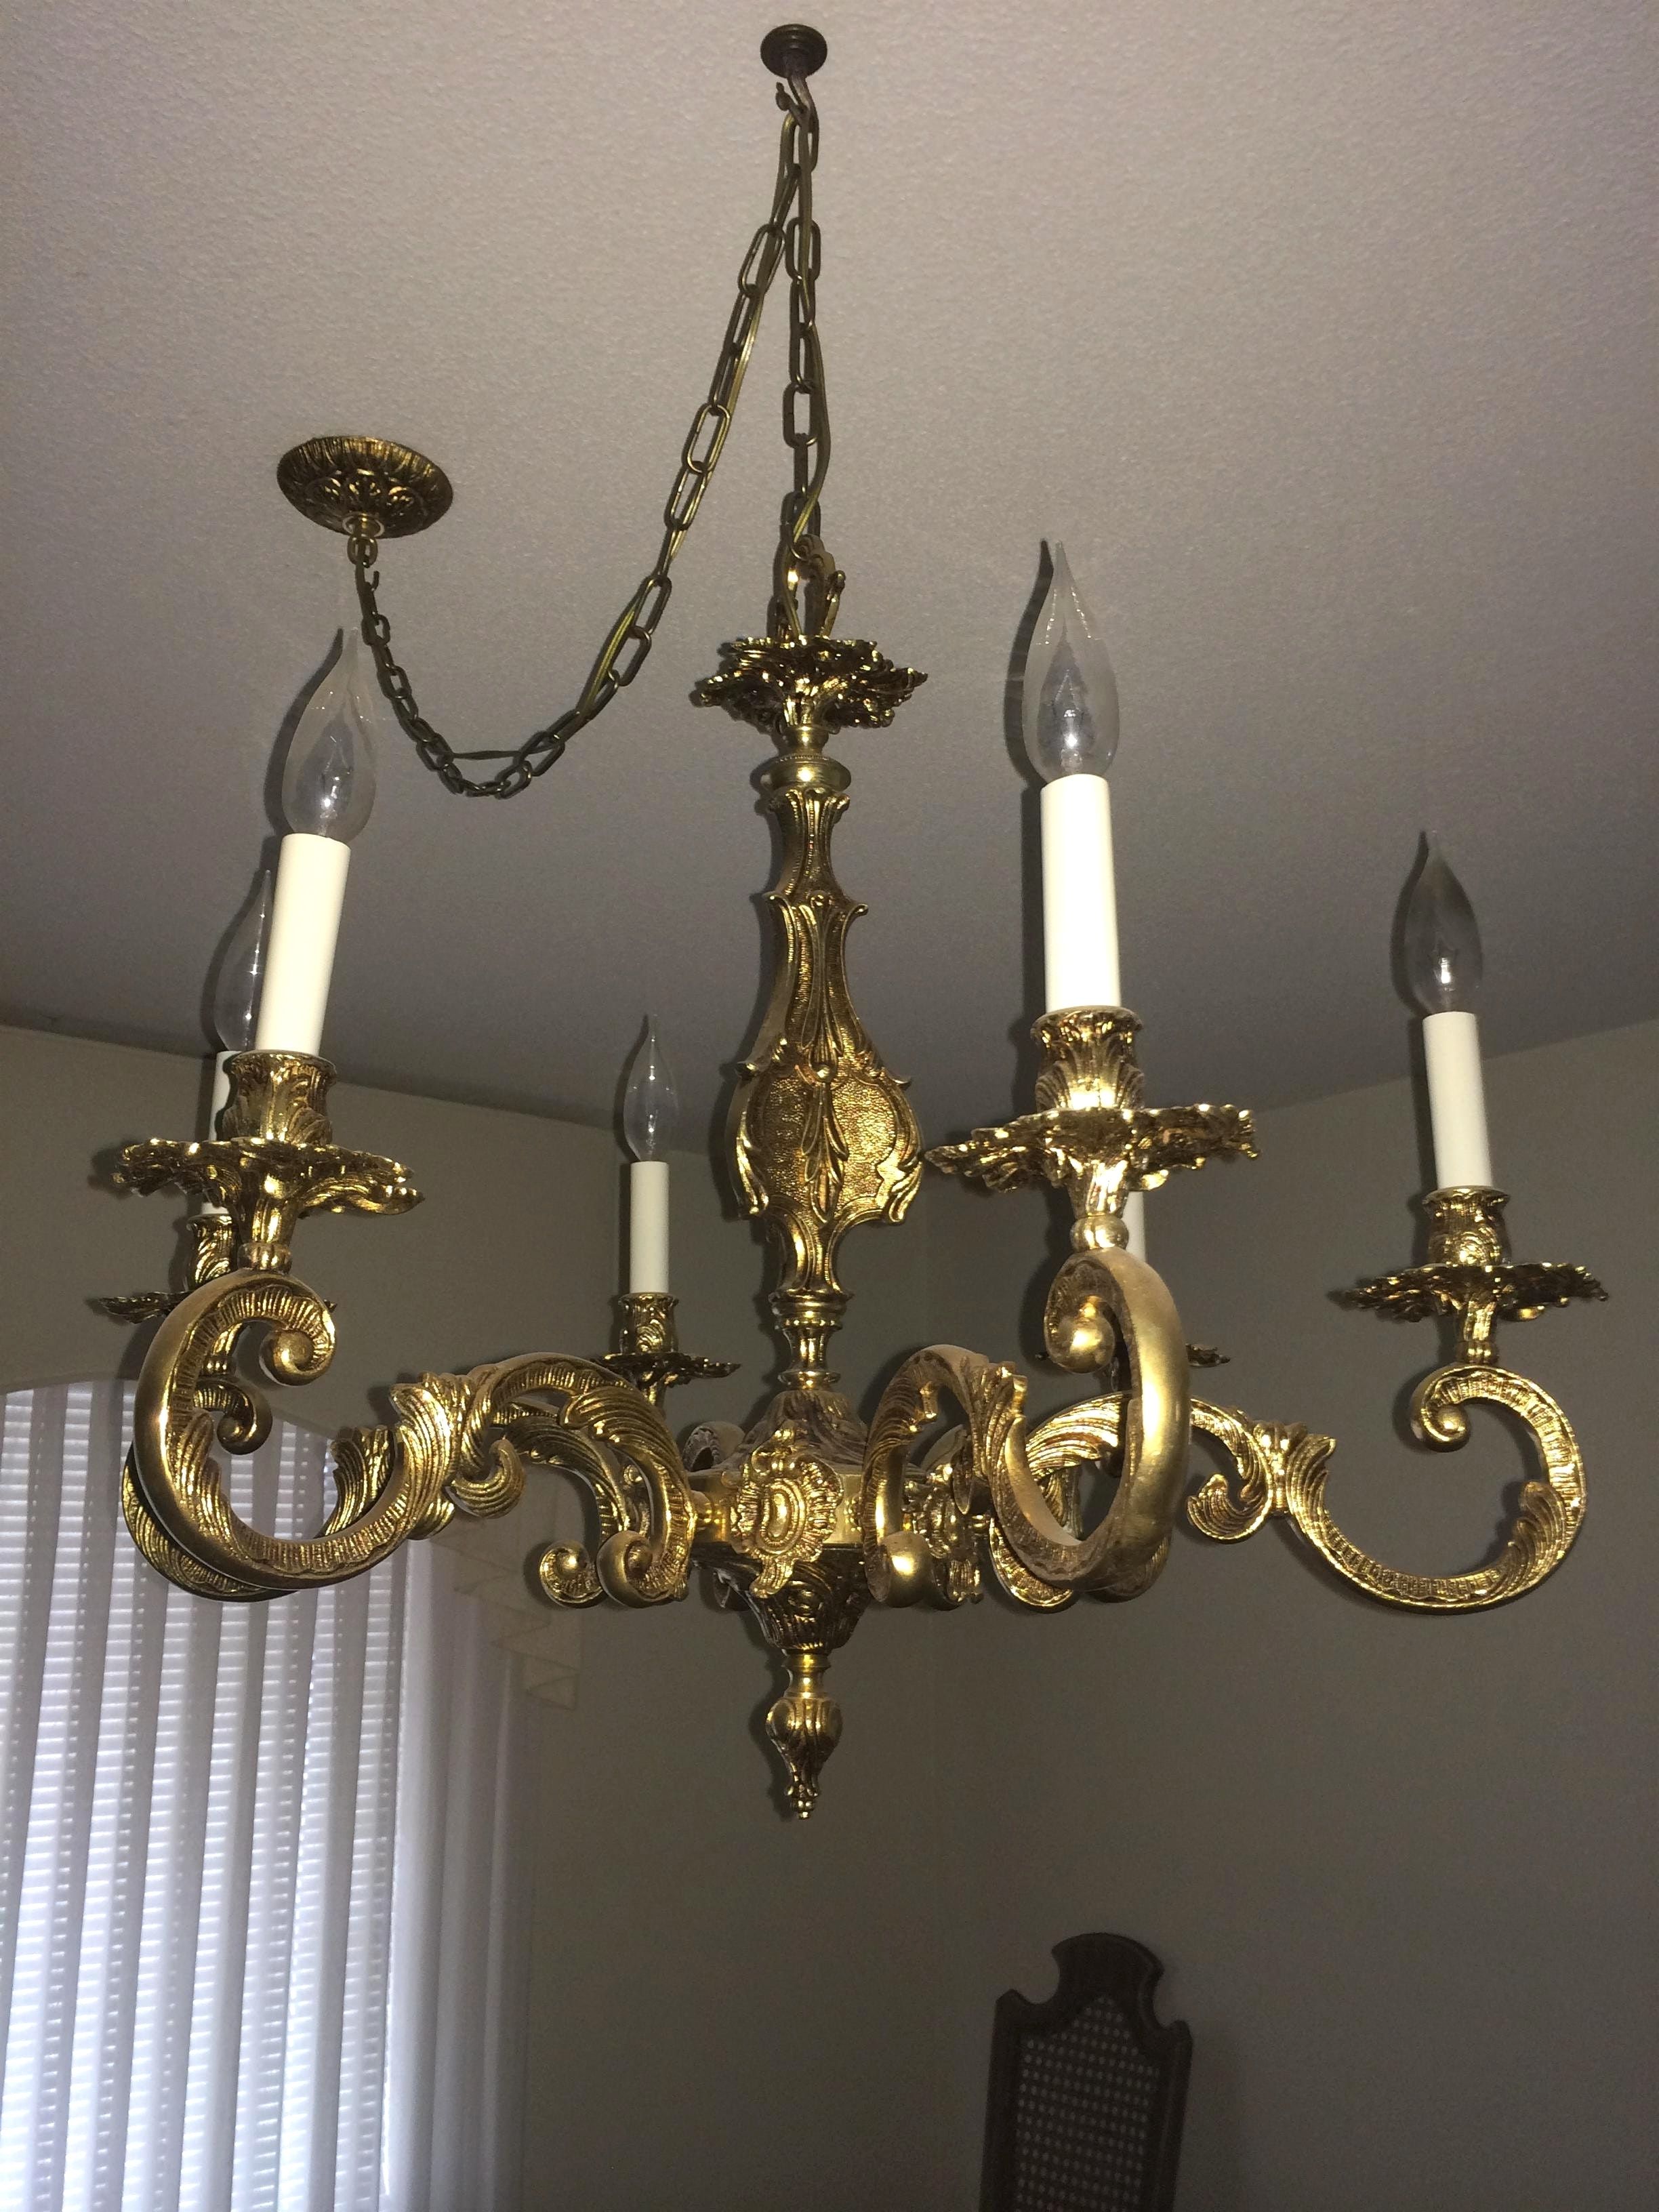 Light : Antique Brass Chandelier Value With Appraisal Instappraisal Within Most Recently Released Old Brass Chandeliers (View 10 of 20)